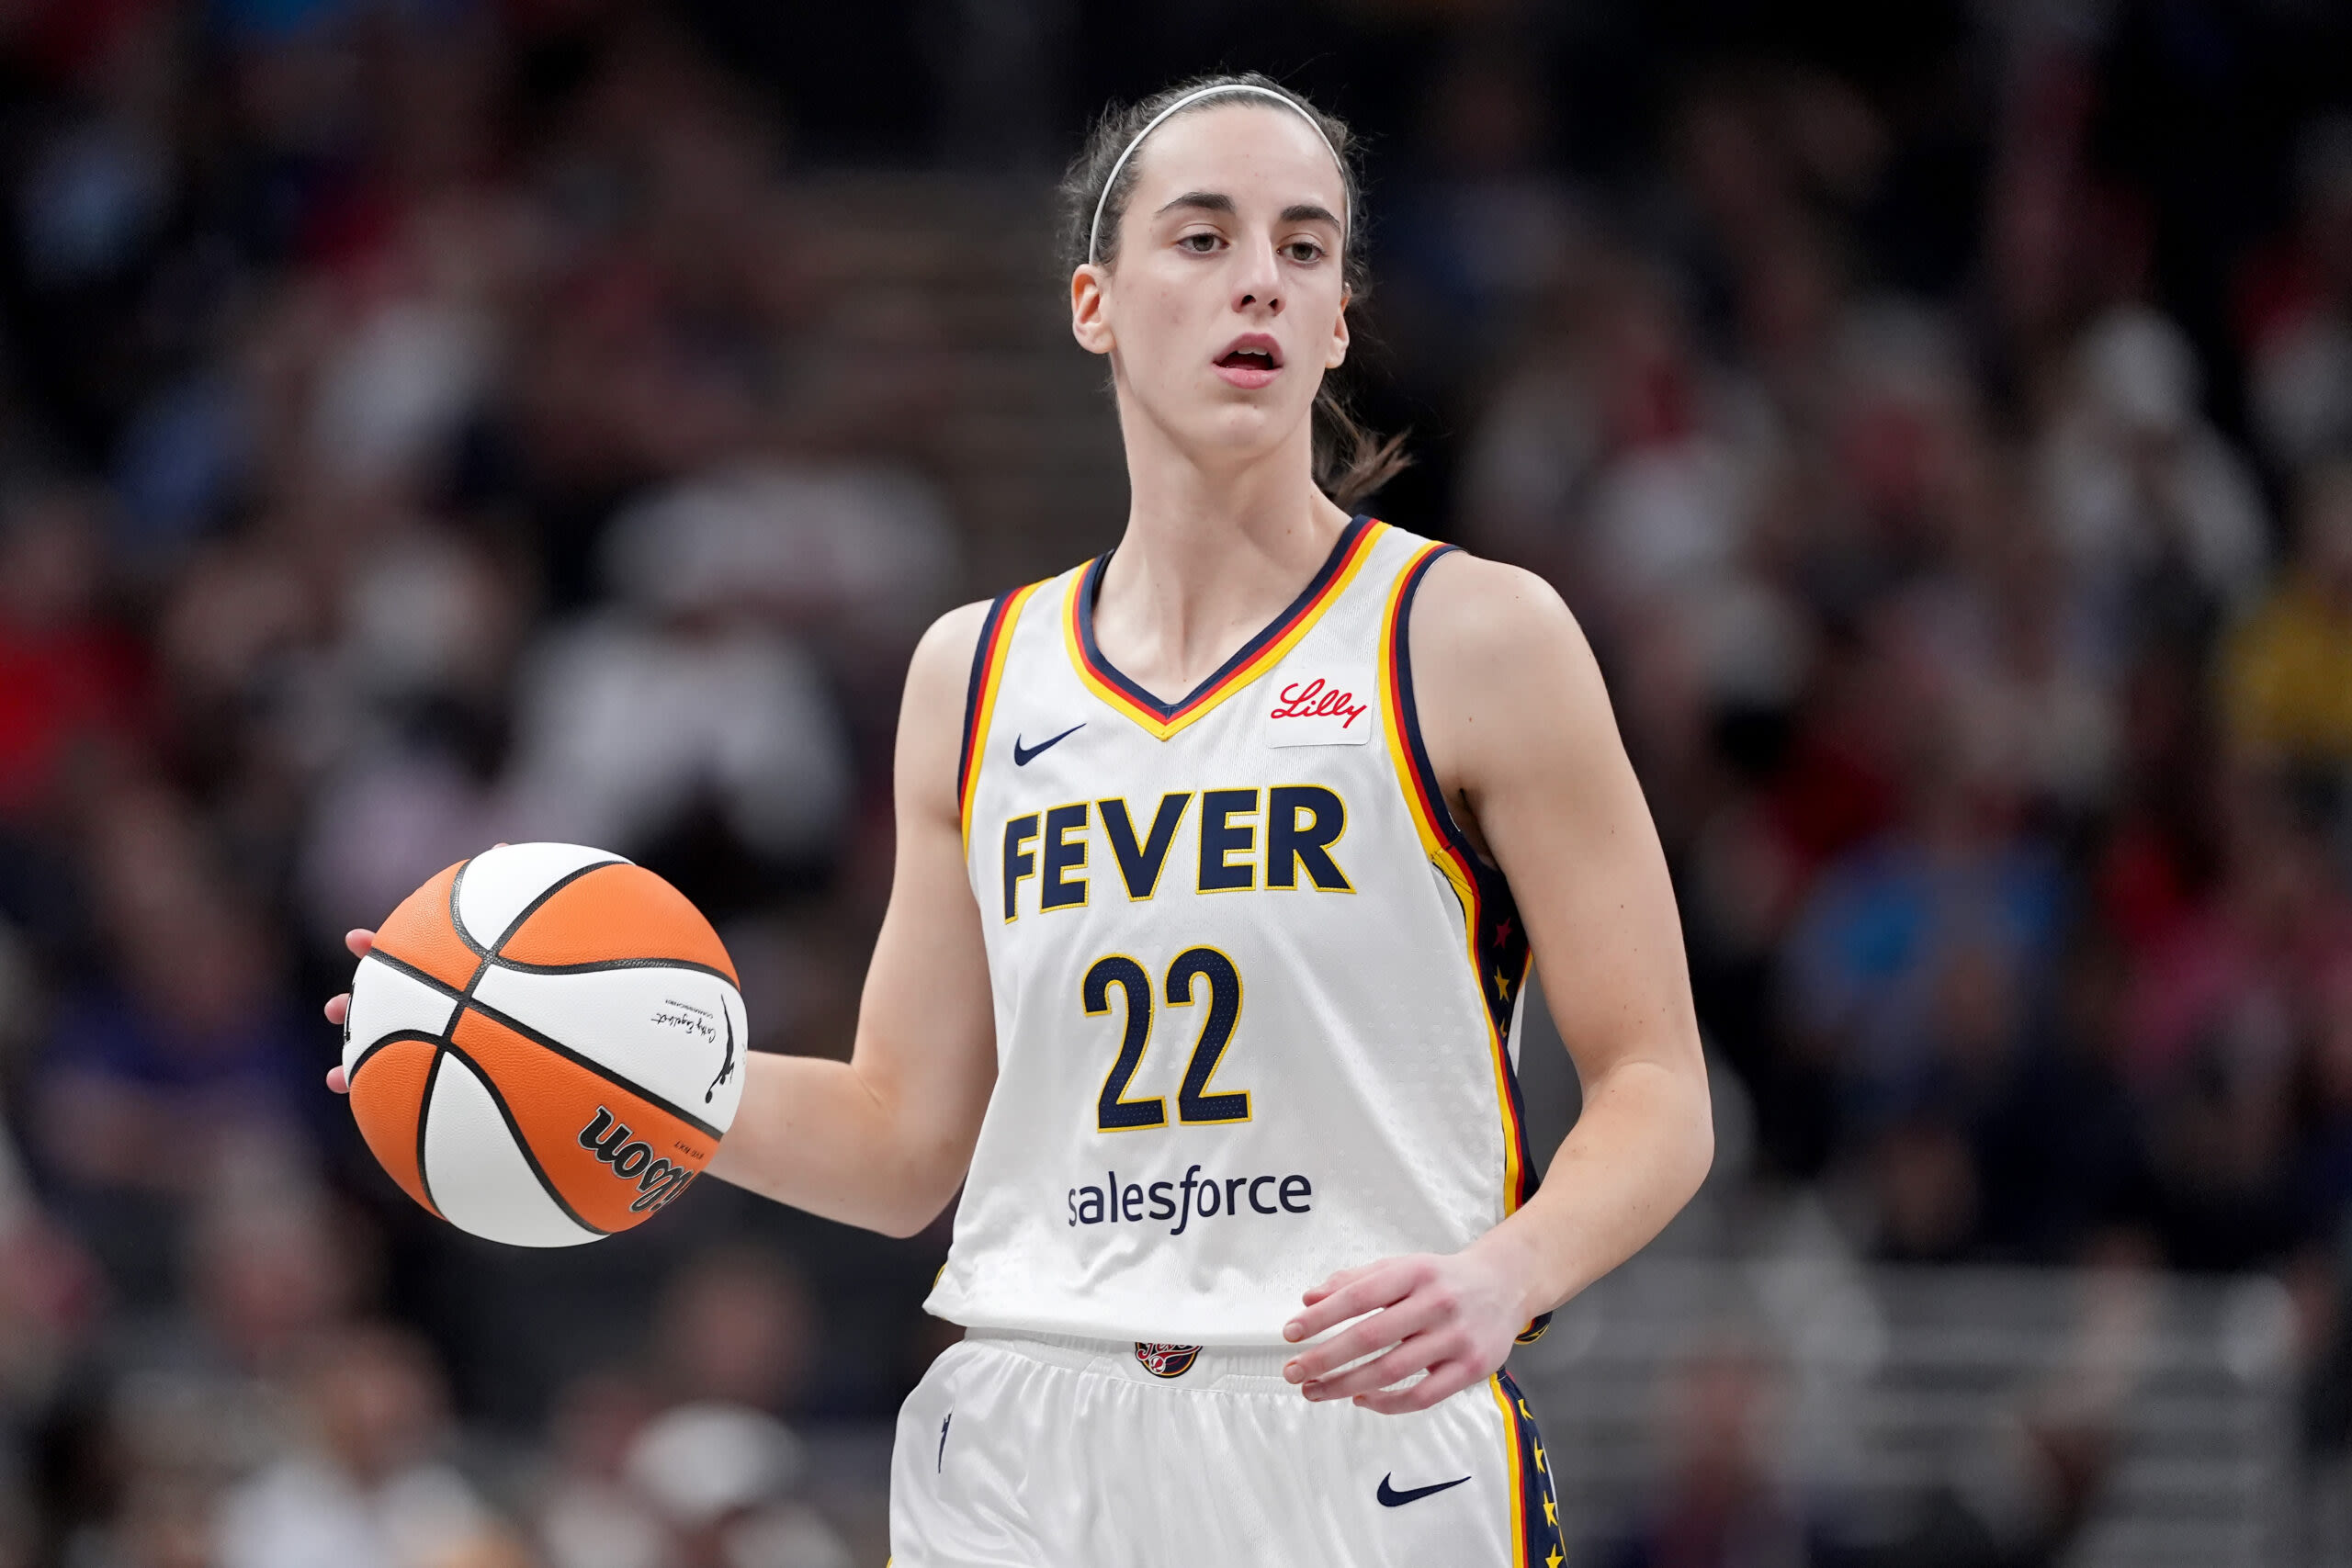 Four games in, Caitlin Clark is already breaking viewership records for the WNBA